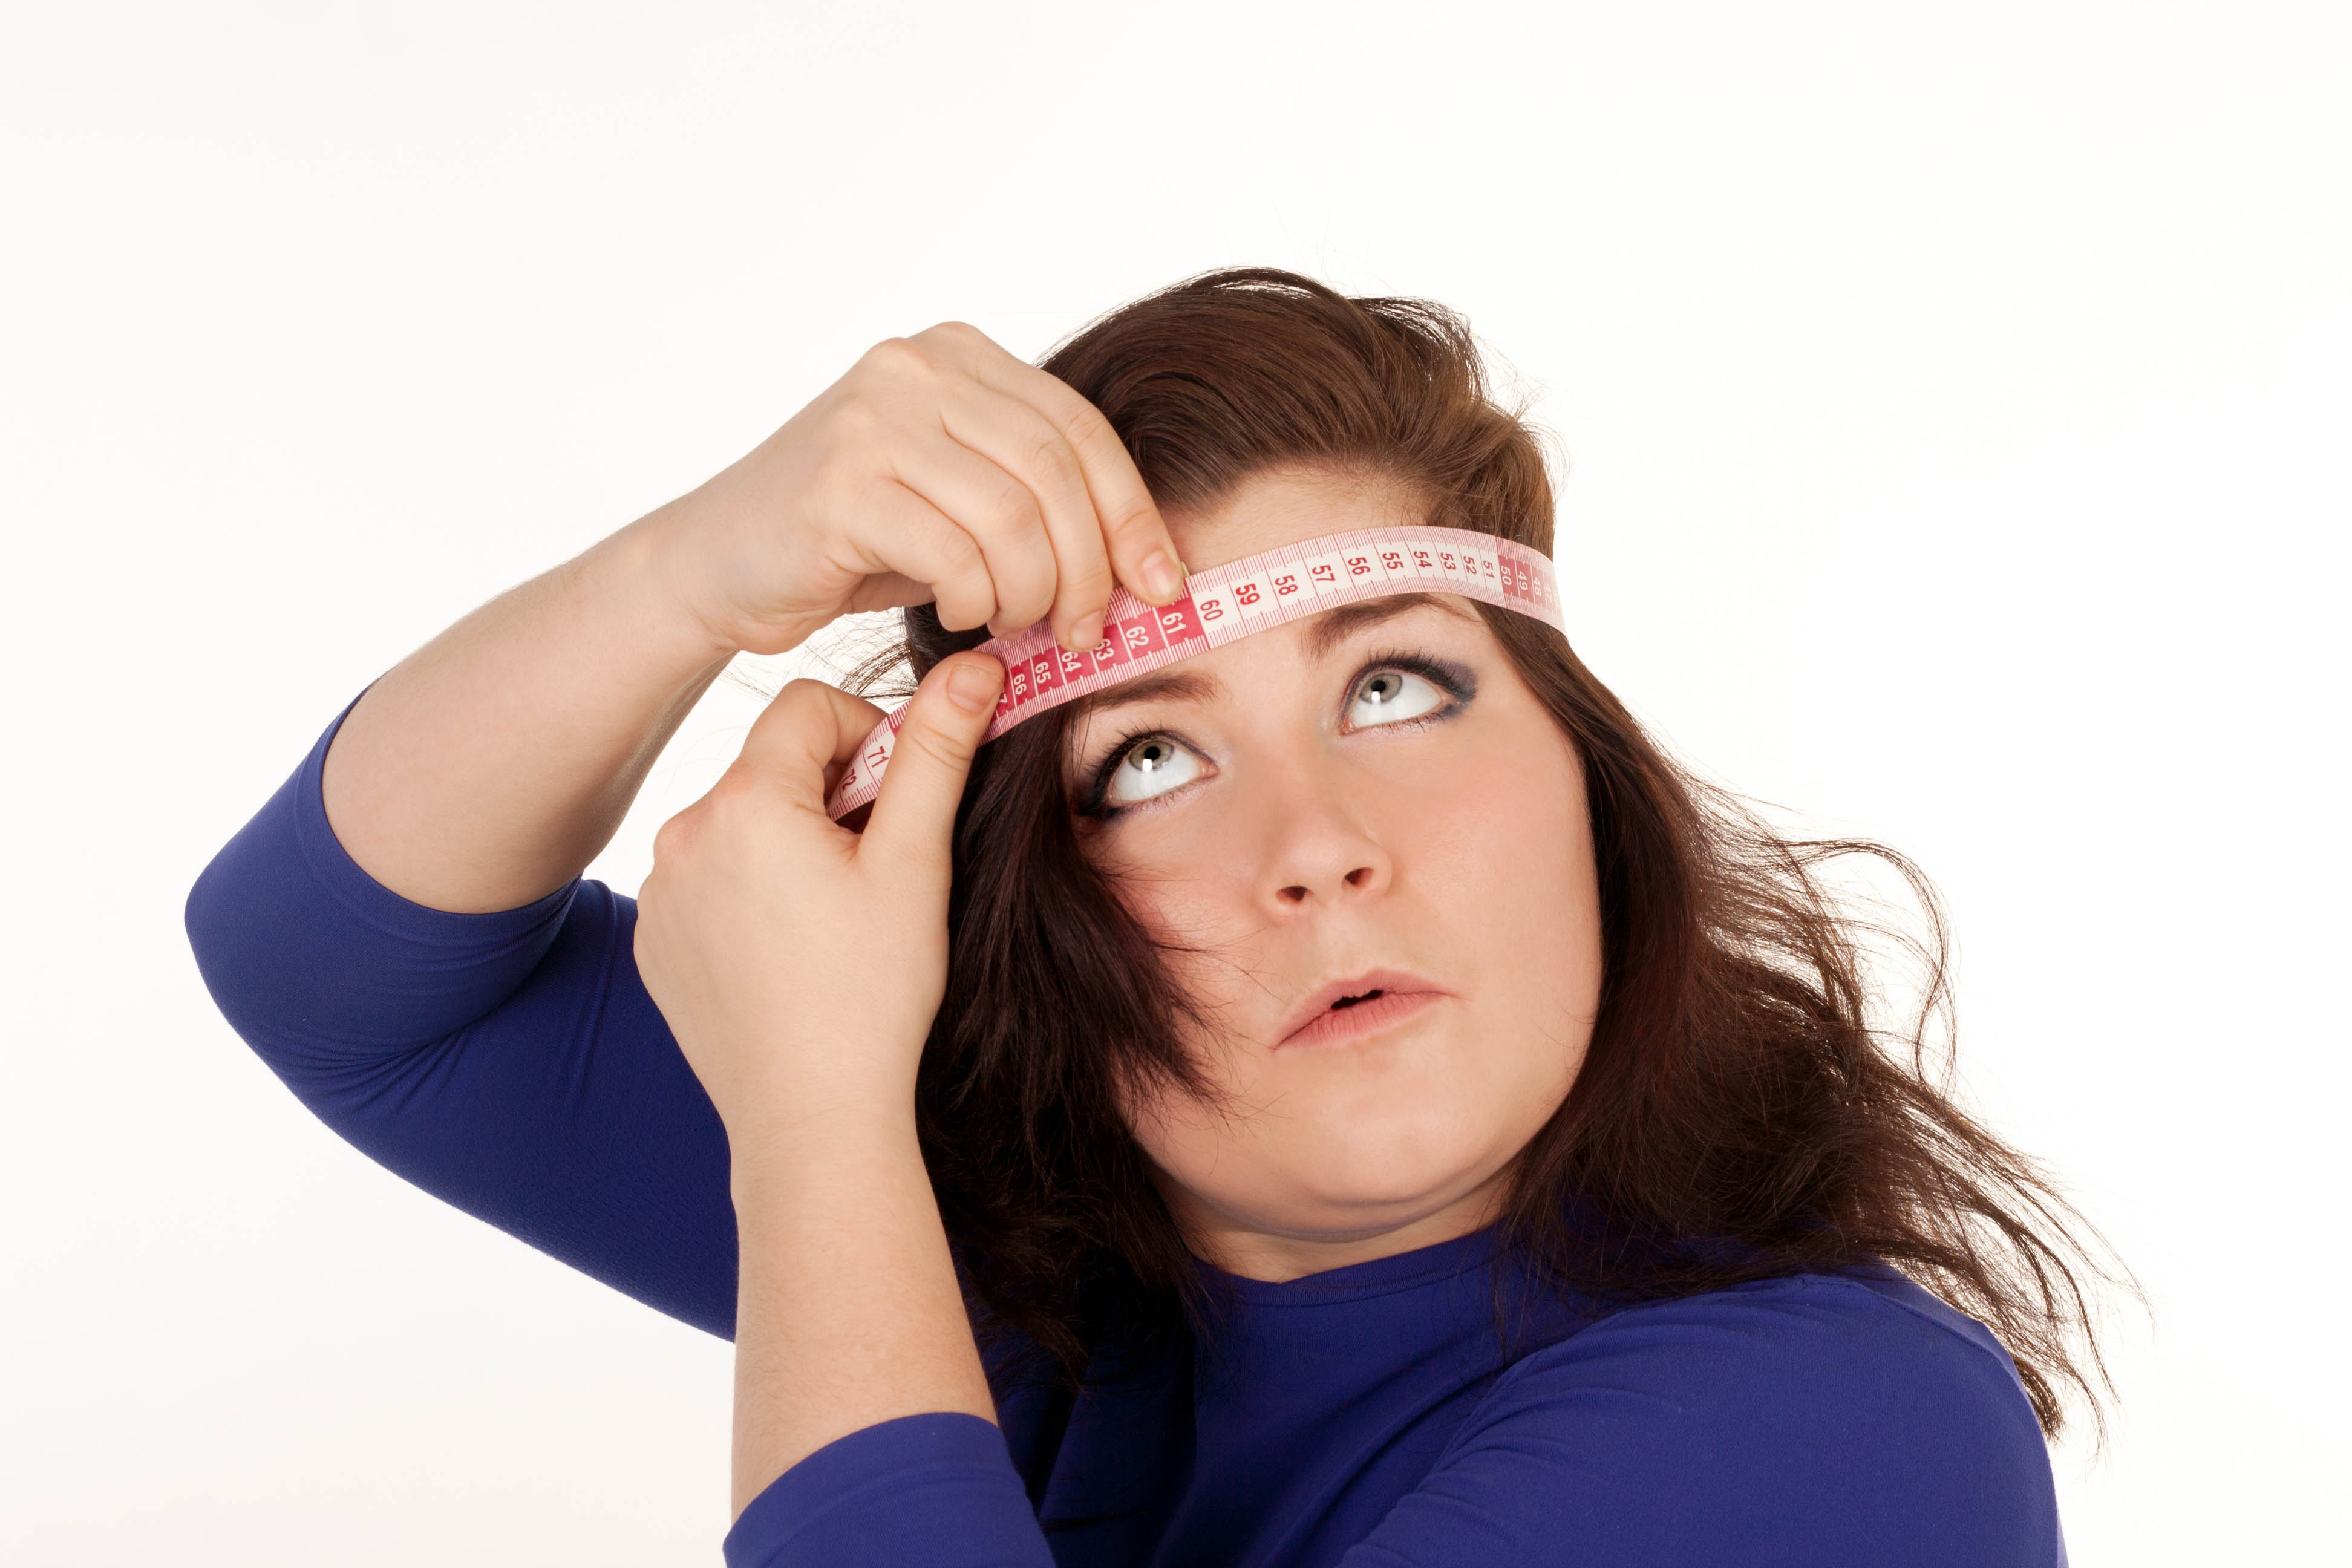 Bigger, young woman wrapping a tape measure around her head to measure her head